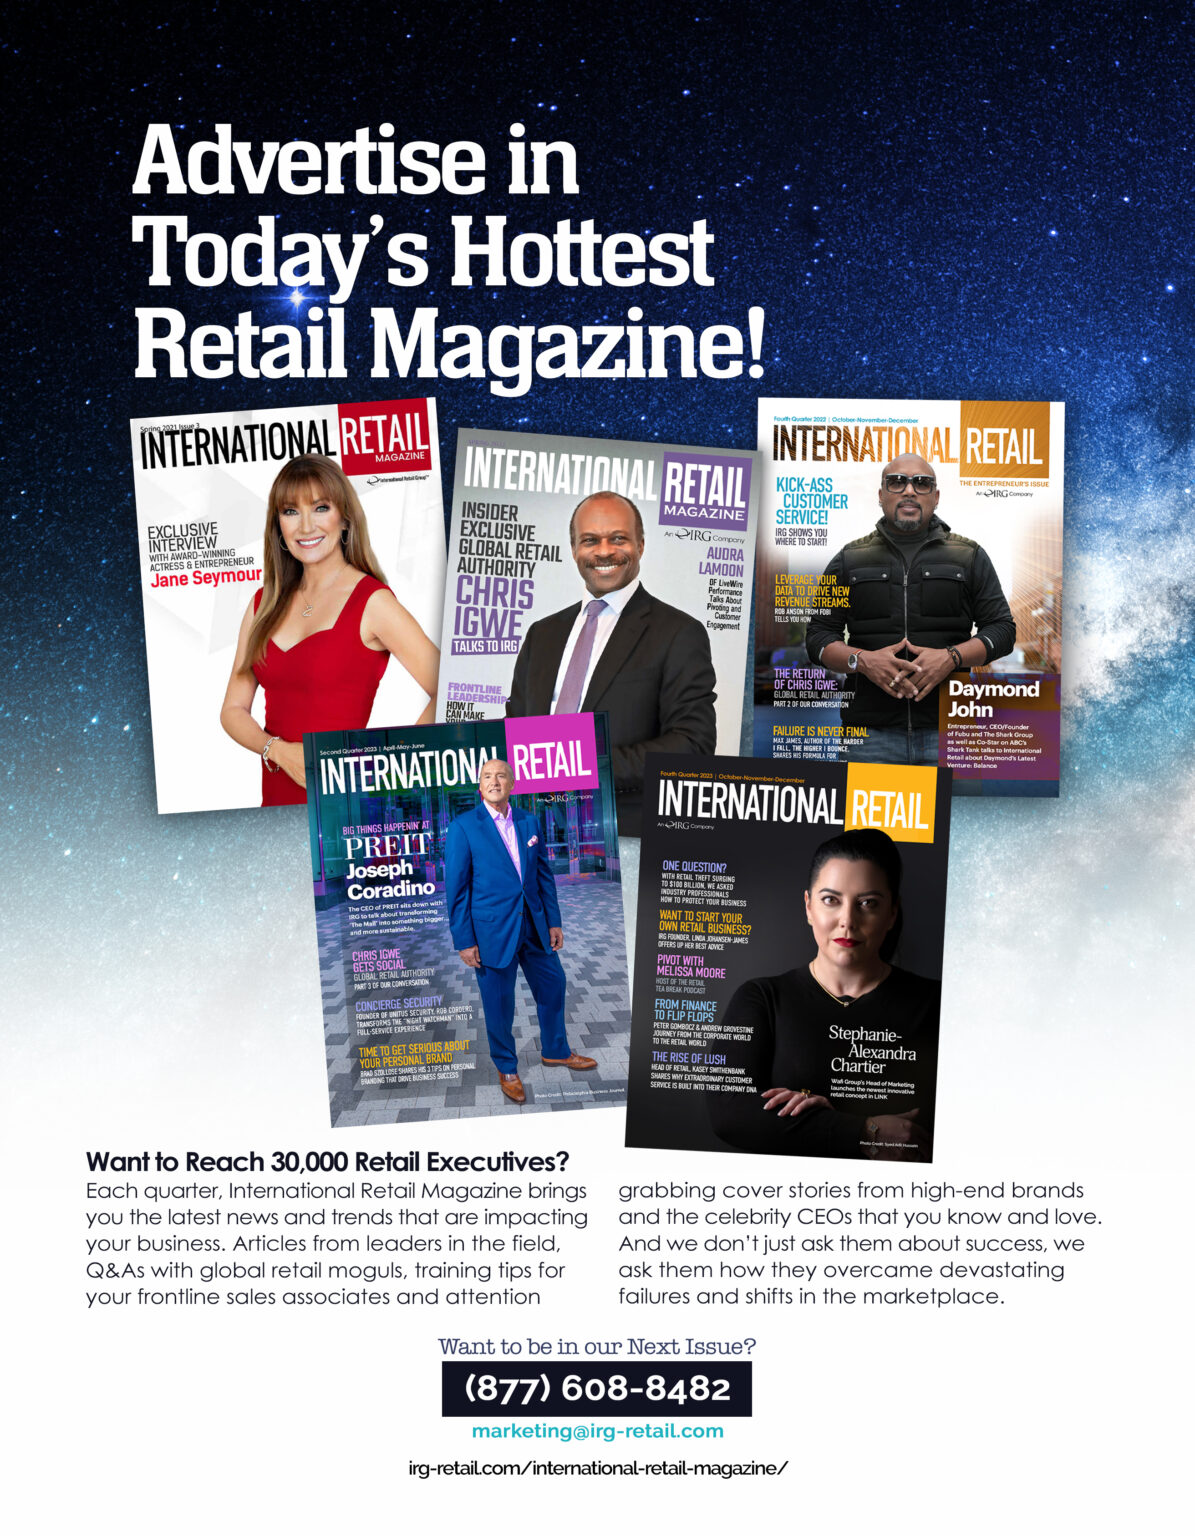 Want to Advertise in Today's Hottest Retail Magazine?